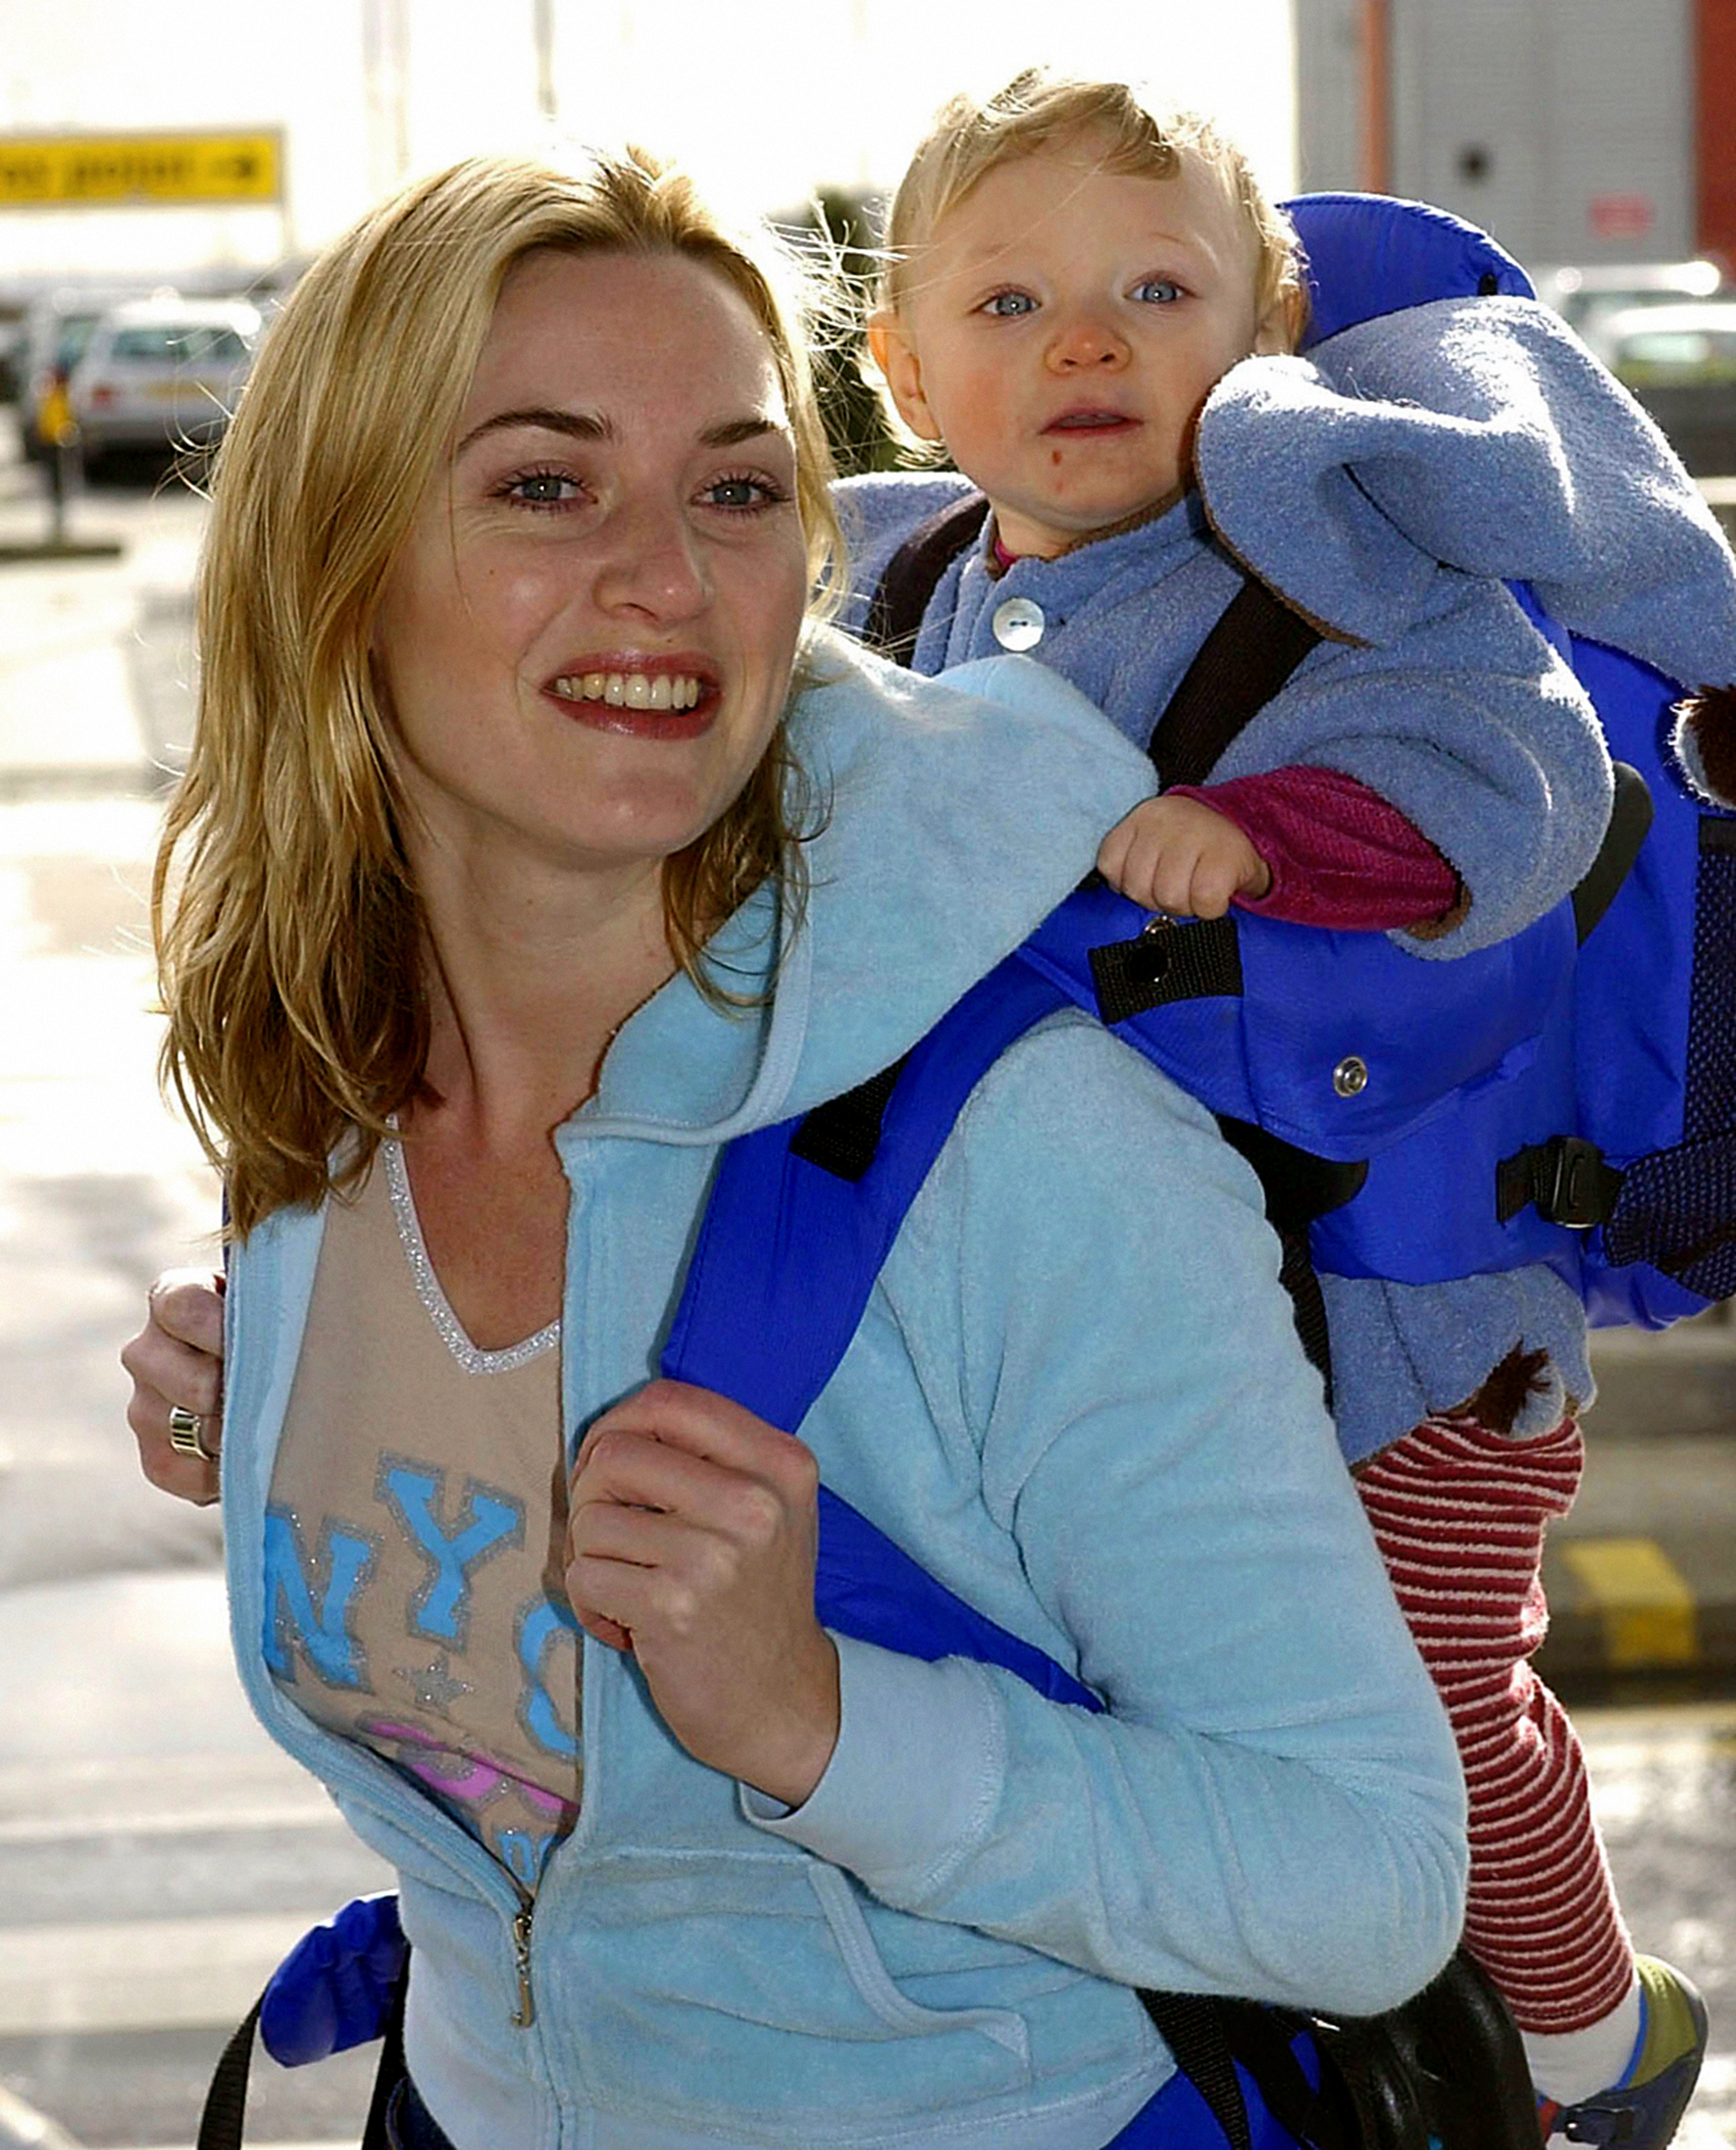 Kate Winslet and Mia Threapleton at London's Heathrow Airport on February 26, 2002 | Getty Images